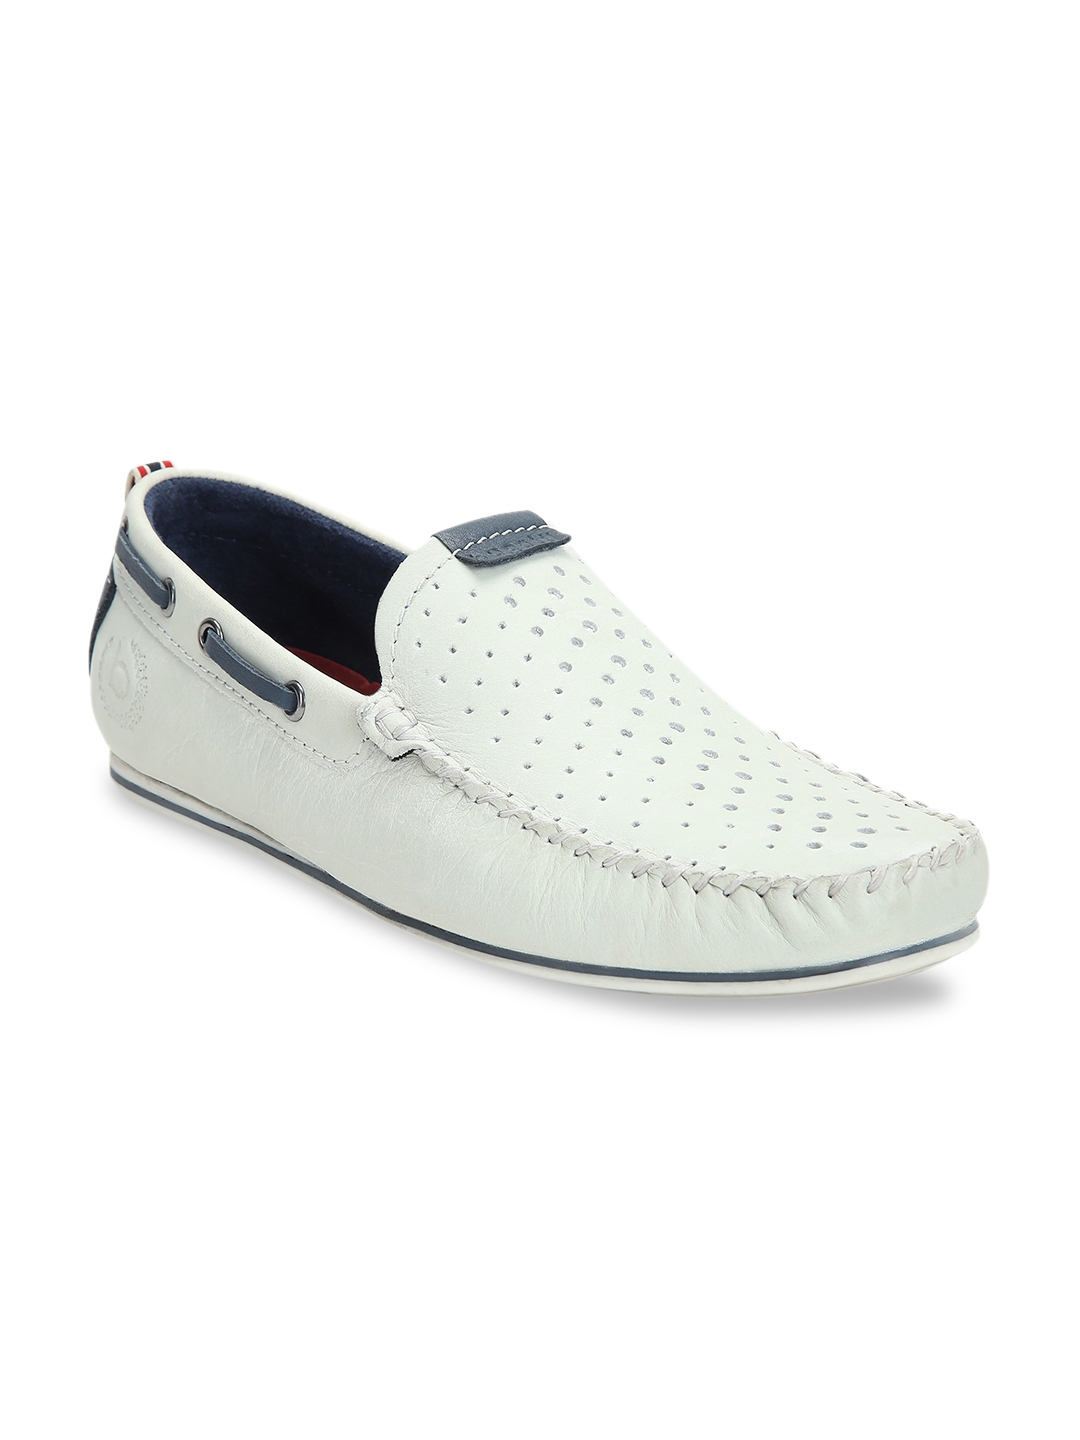 off white loafers mens